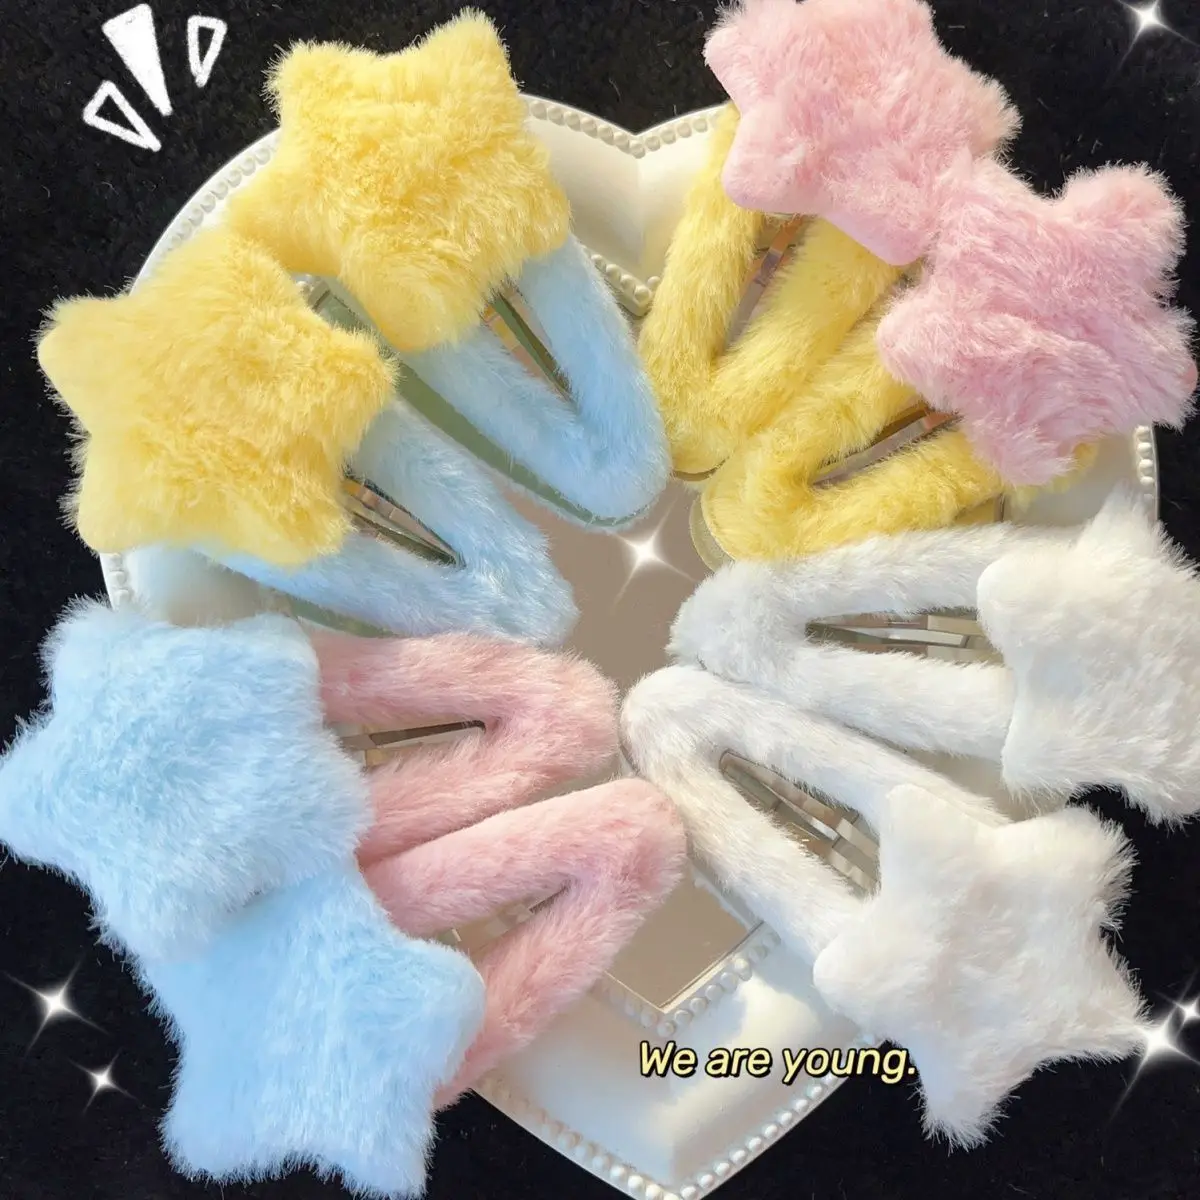 8pcs/set Cute Colorful Star Waterdrop Shape Hair Clips For Girls Children Lovely Hair Decorate Hairpins Kids Hair Accessories 8pcs fall winter kids hair clips for girls knit wool plush bows baby girl hair accessories cartoon bear bunny children hairclips